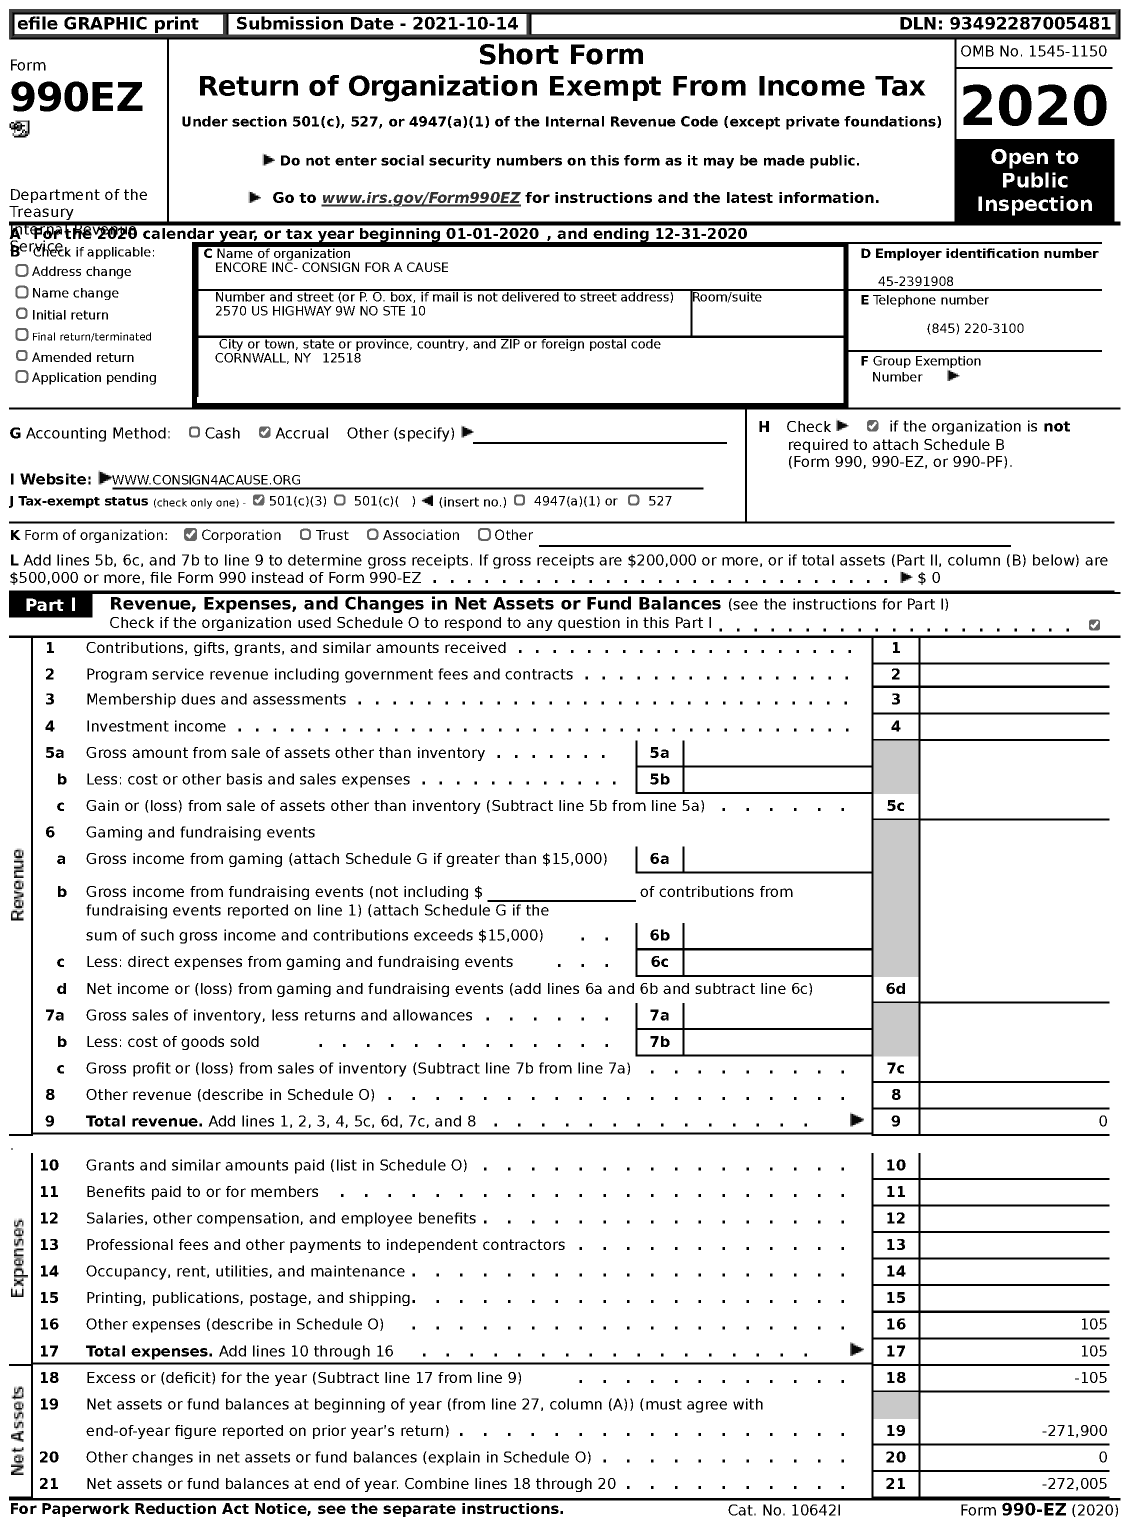 Image of first page of 2020 Form 990EZ for ENCORE INC- Consign for A Cause